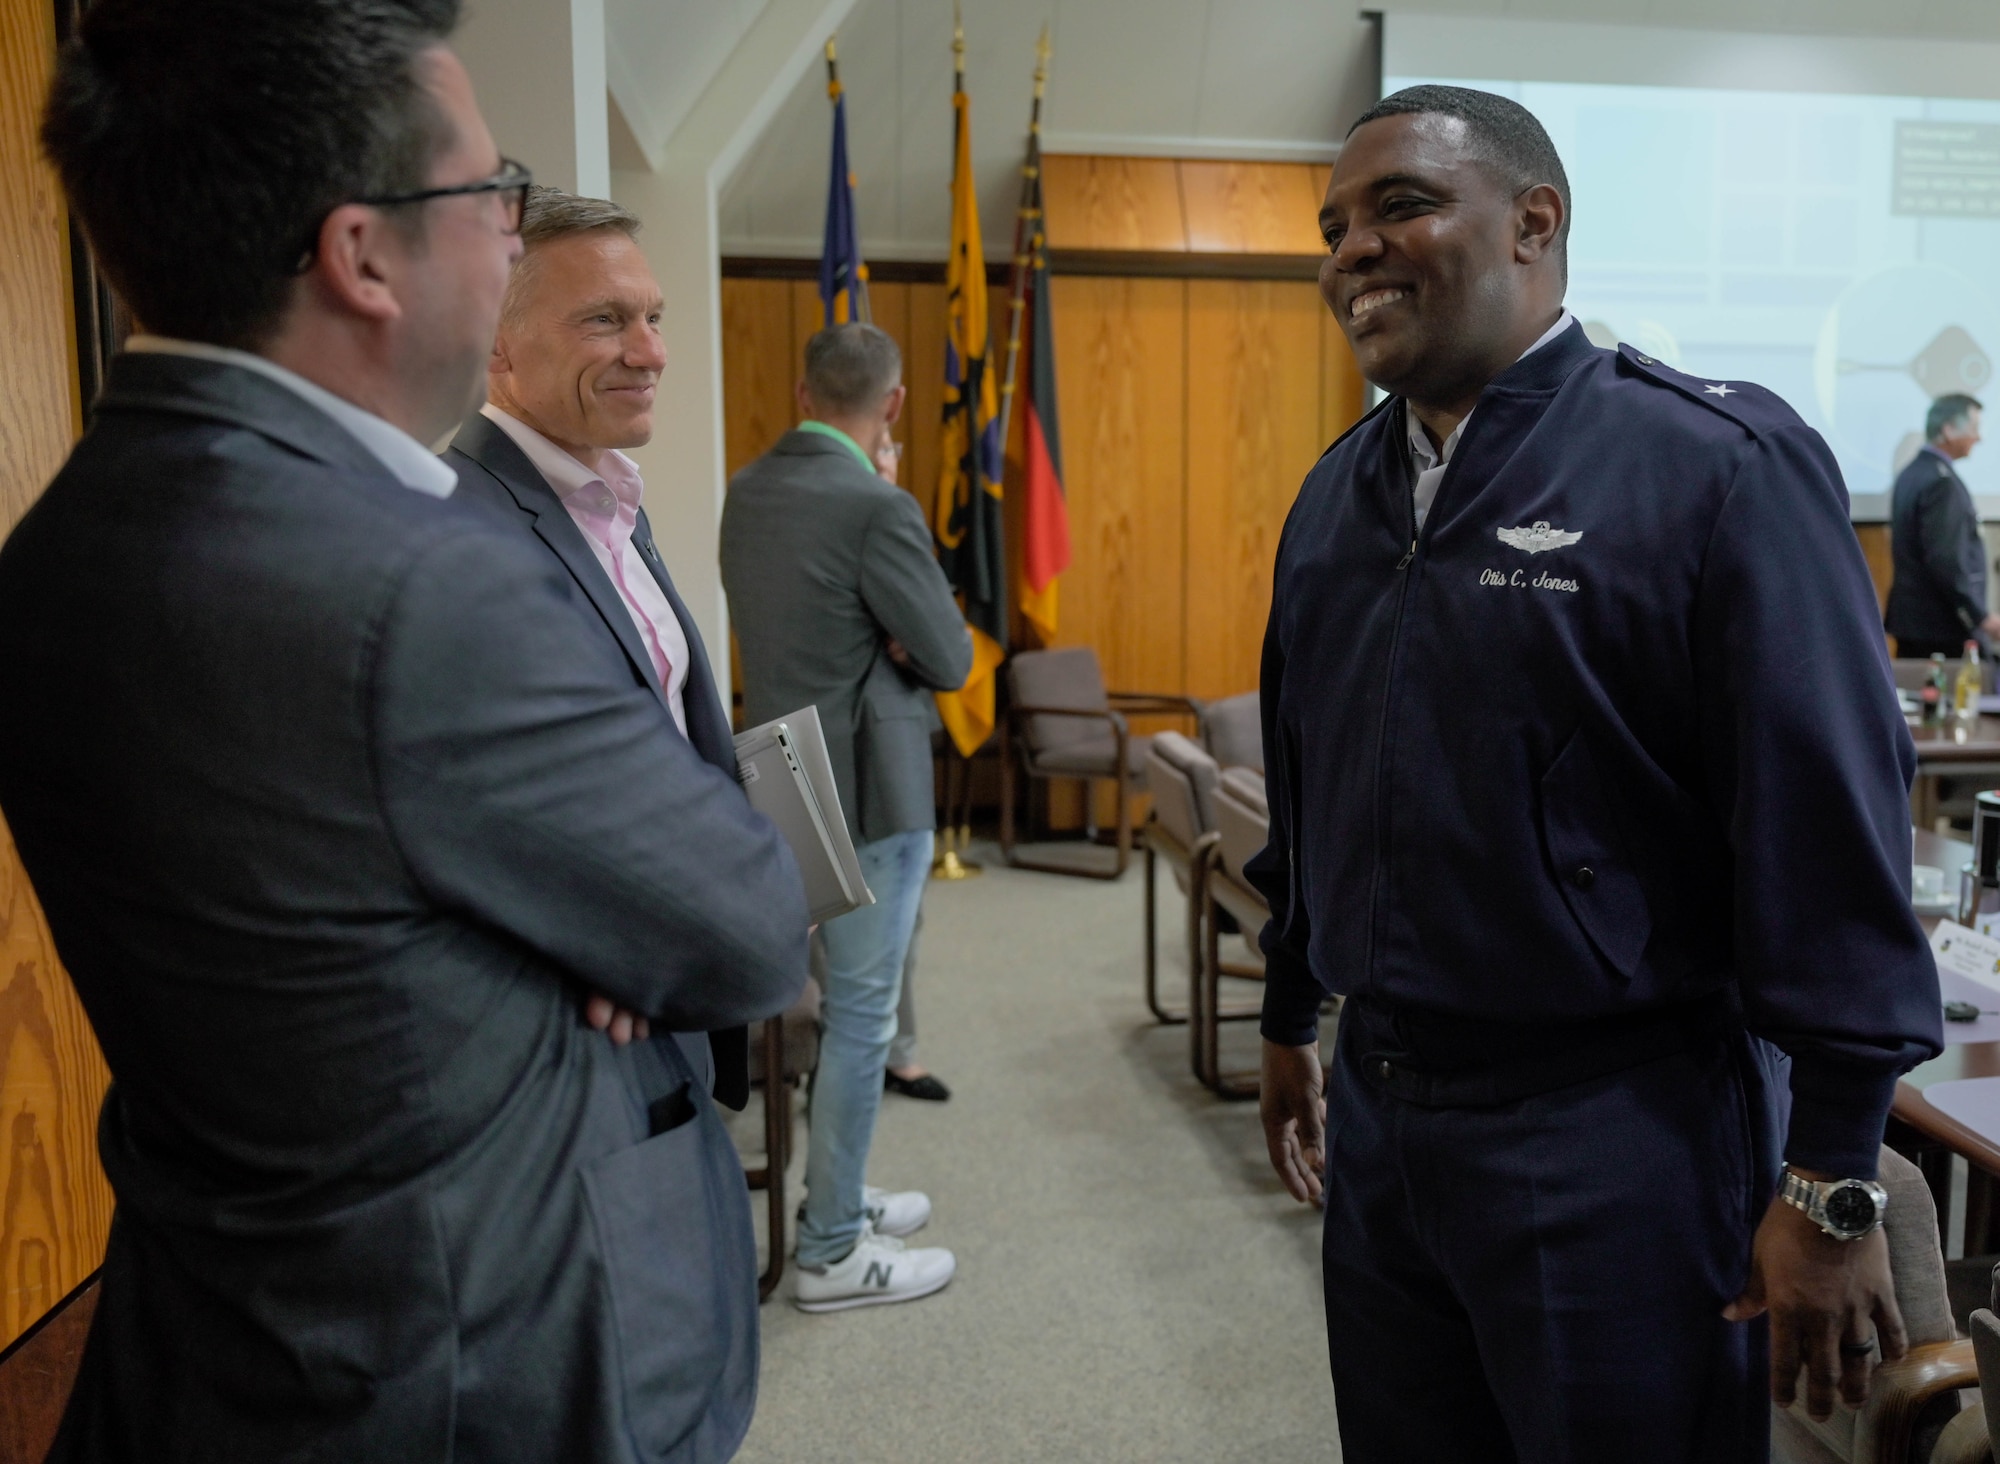 U.S. Air Force Brig. Gen. Otis C. Jones, 86th Airlift Wing commander, speaks with local government officials at a mayor's forum.